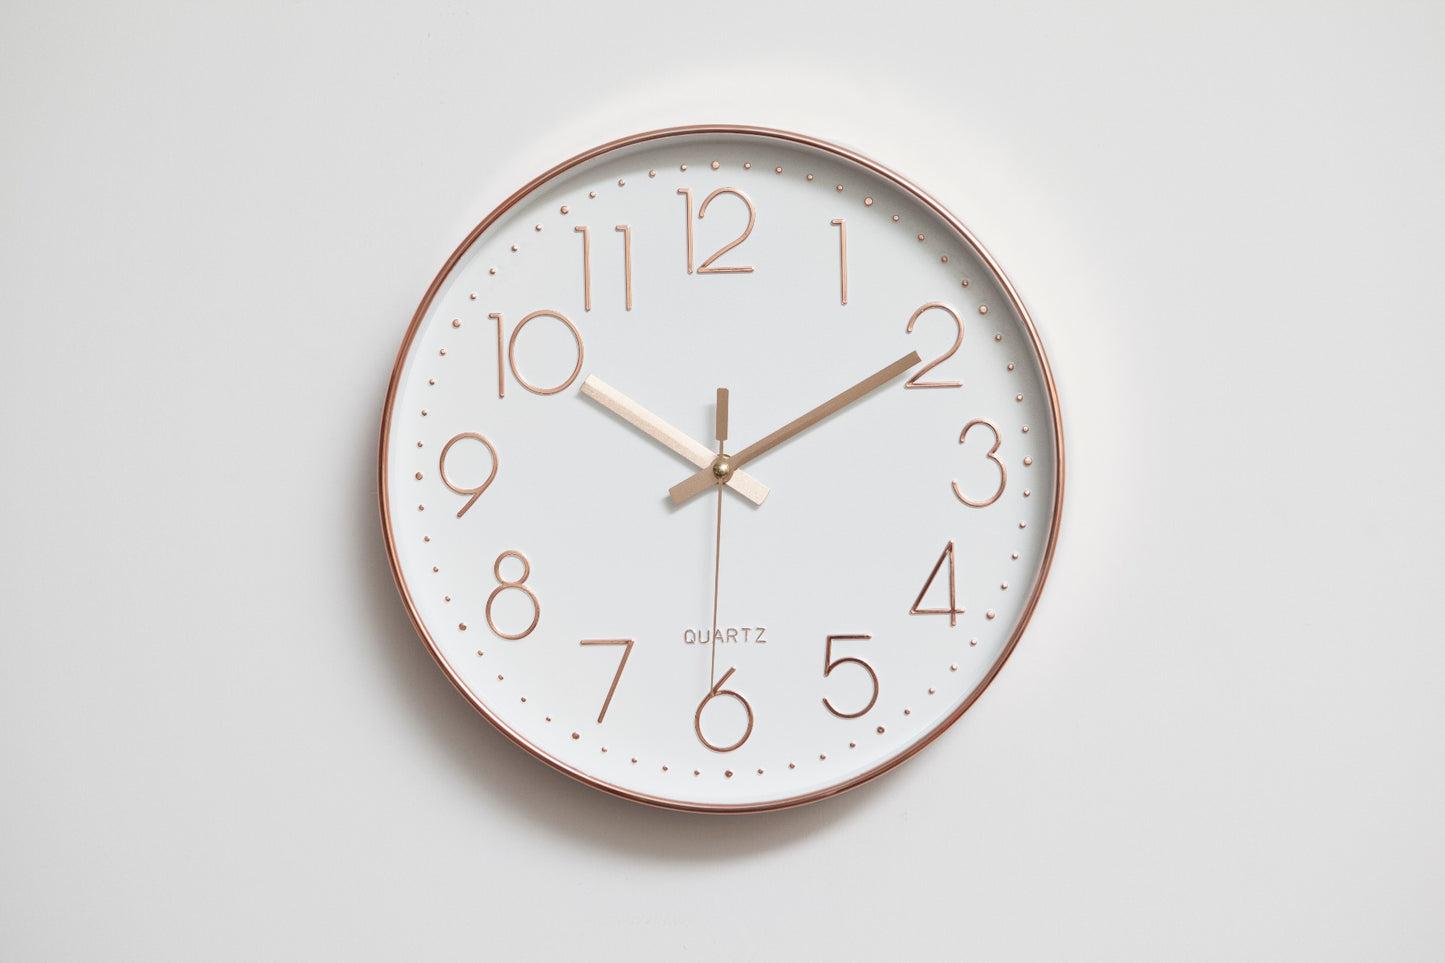 Modern Wall Clock Silent Non-Ticking Quartz Battery Operated Rose Gold - image7